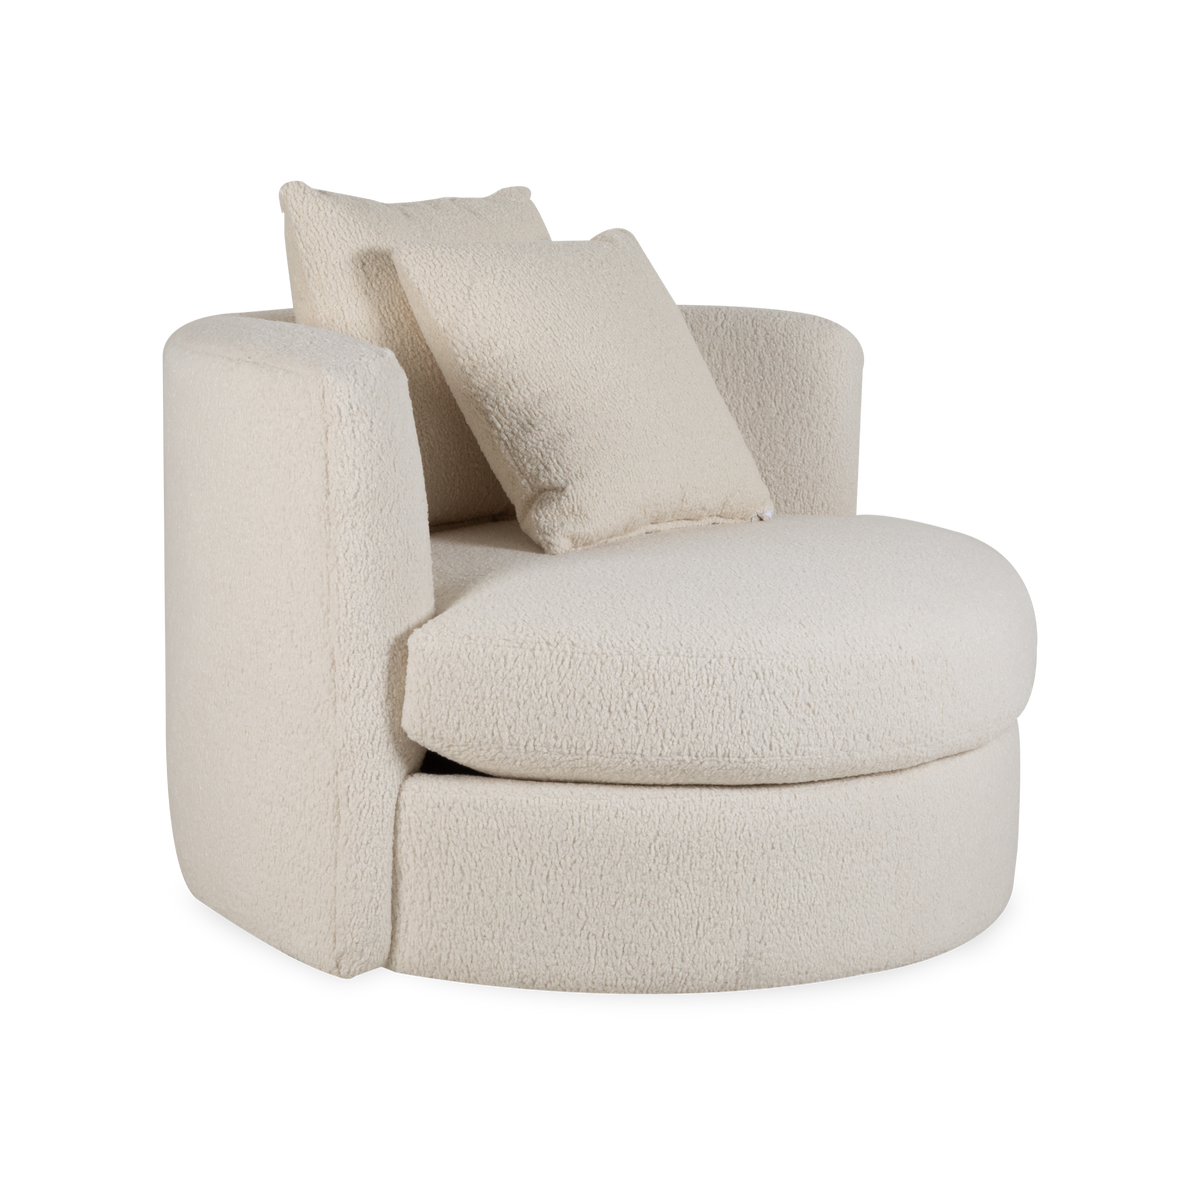 Go for a spin on the Atlas Swivel Chair.